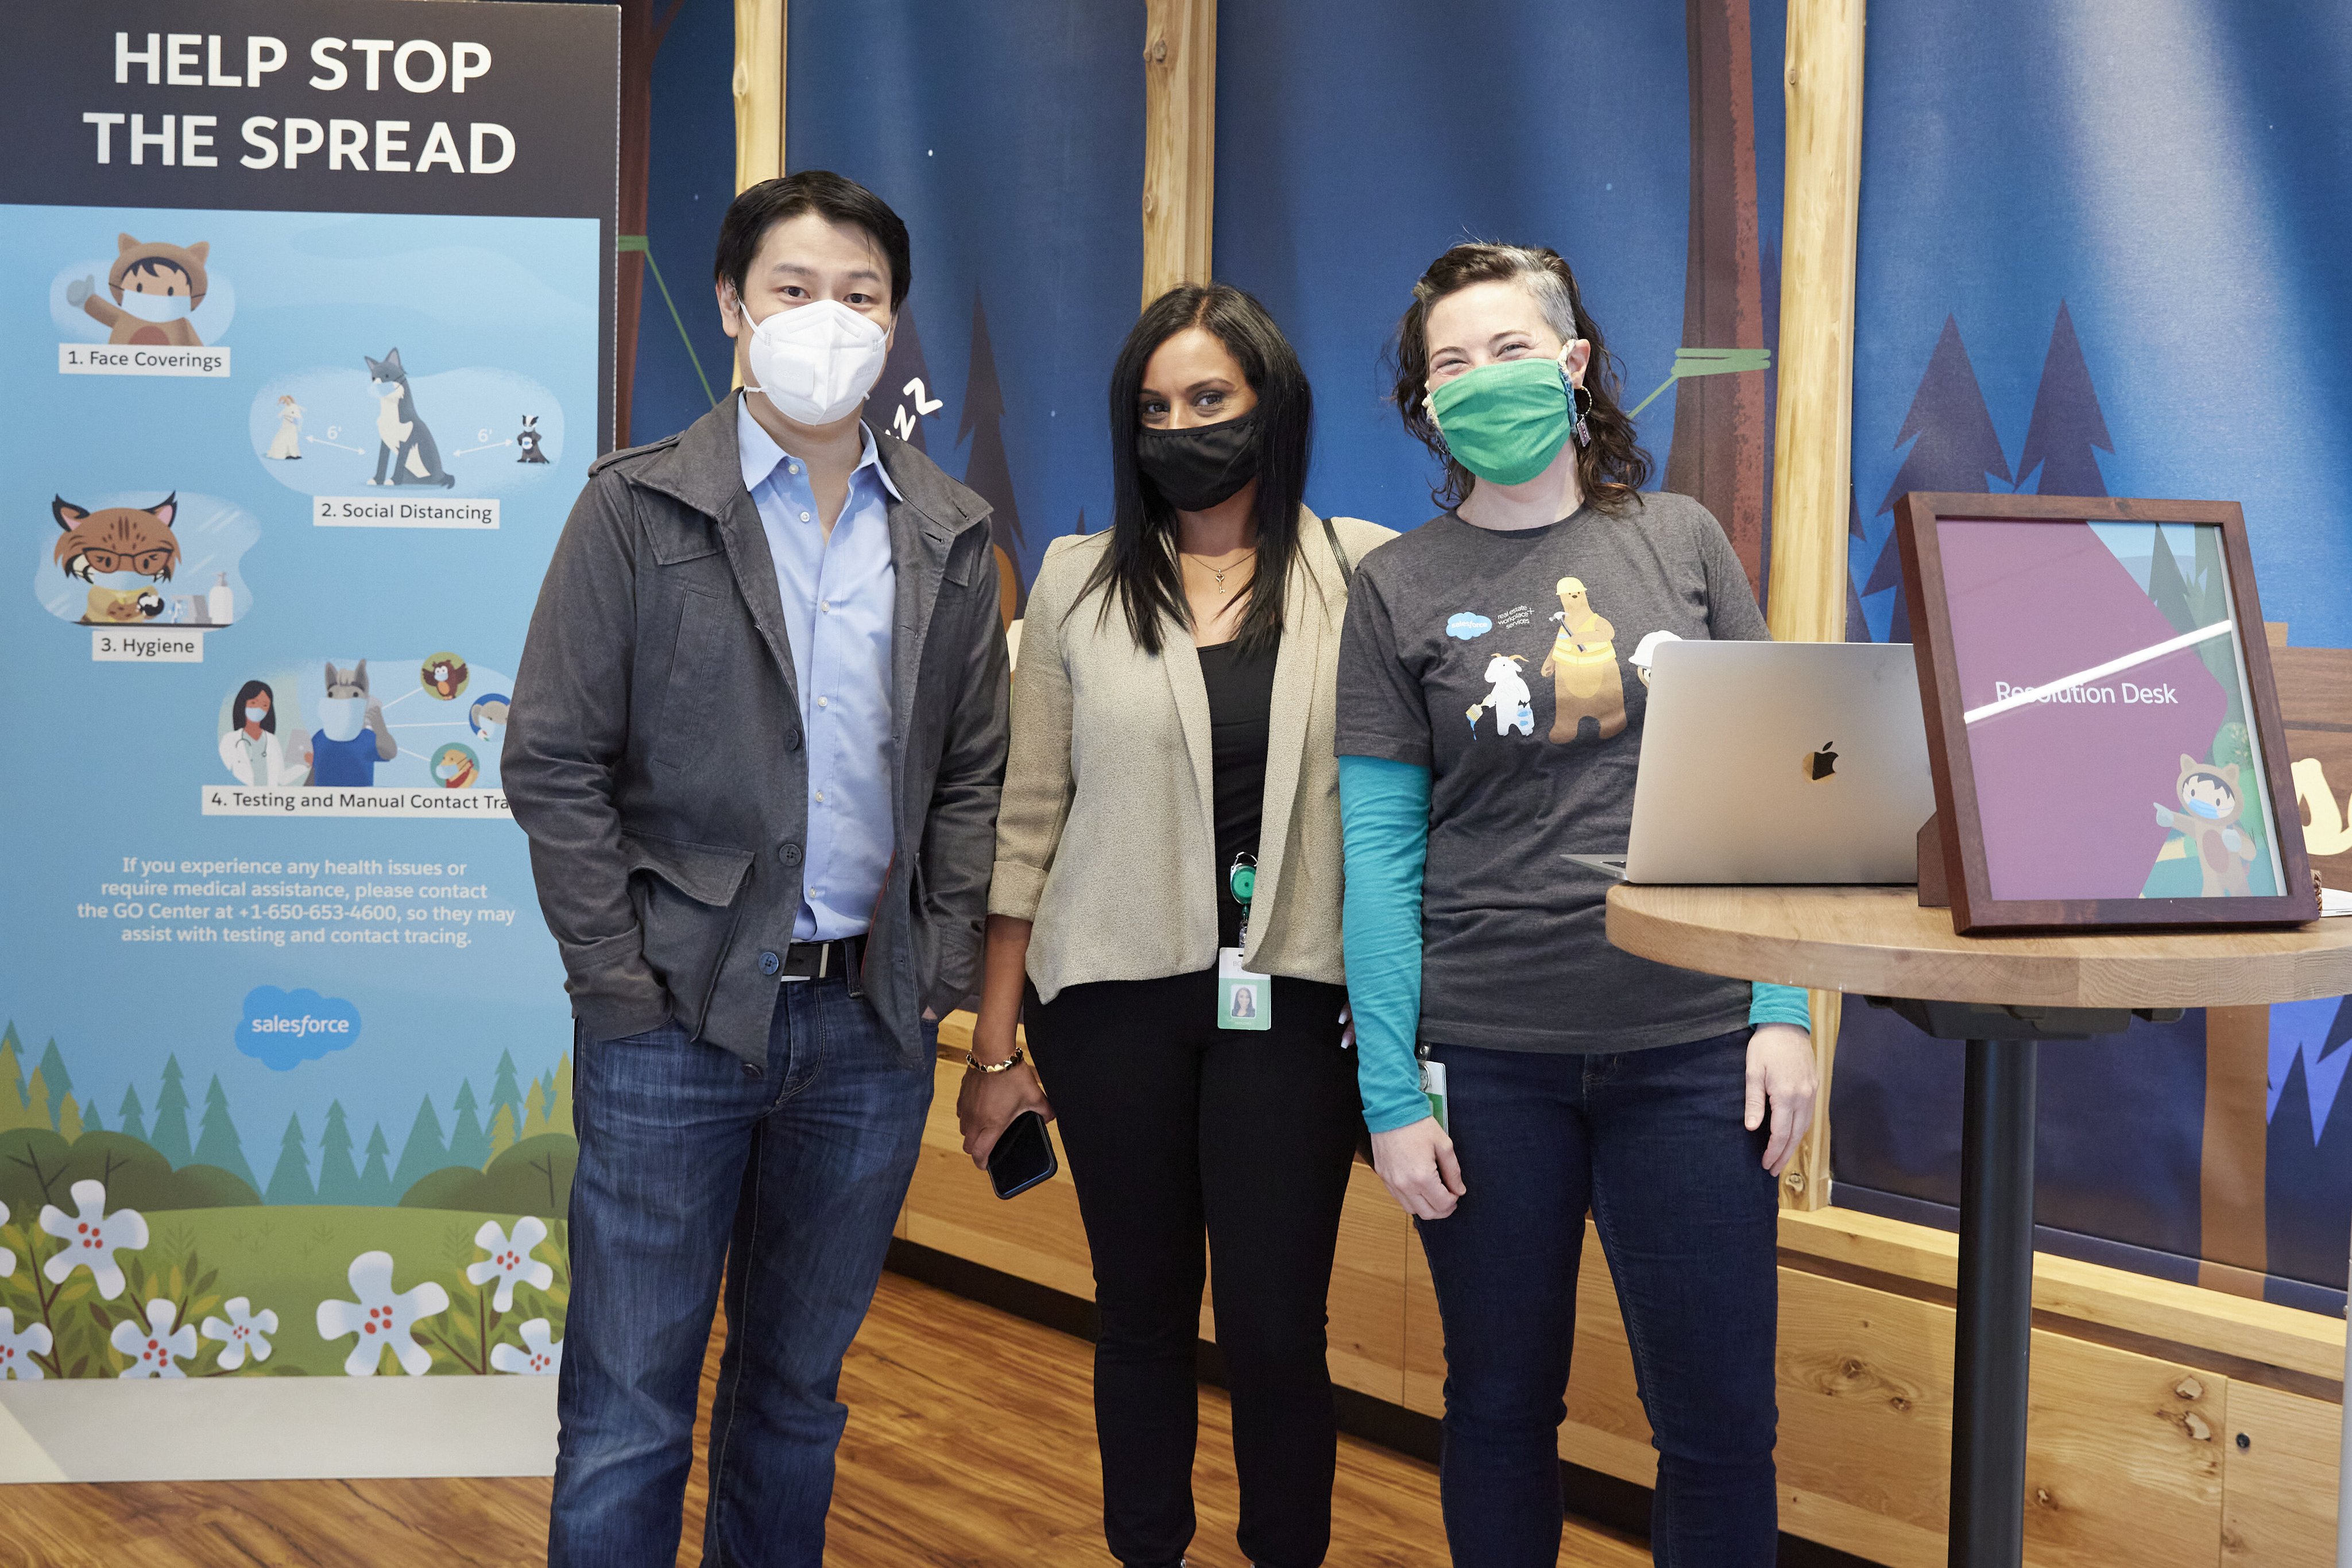 Salesforce It S Reopening Day At Salesforce Tower San Francisco And Our Office In Irvine California From New Health And Safety Protocols To Redesigned Floor Layouts Check Out What Our Employees